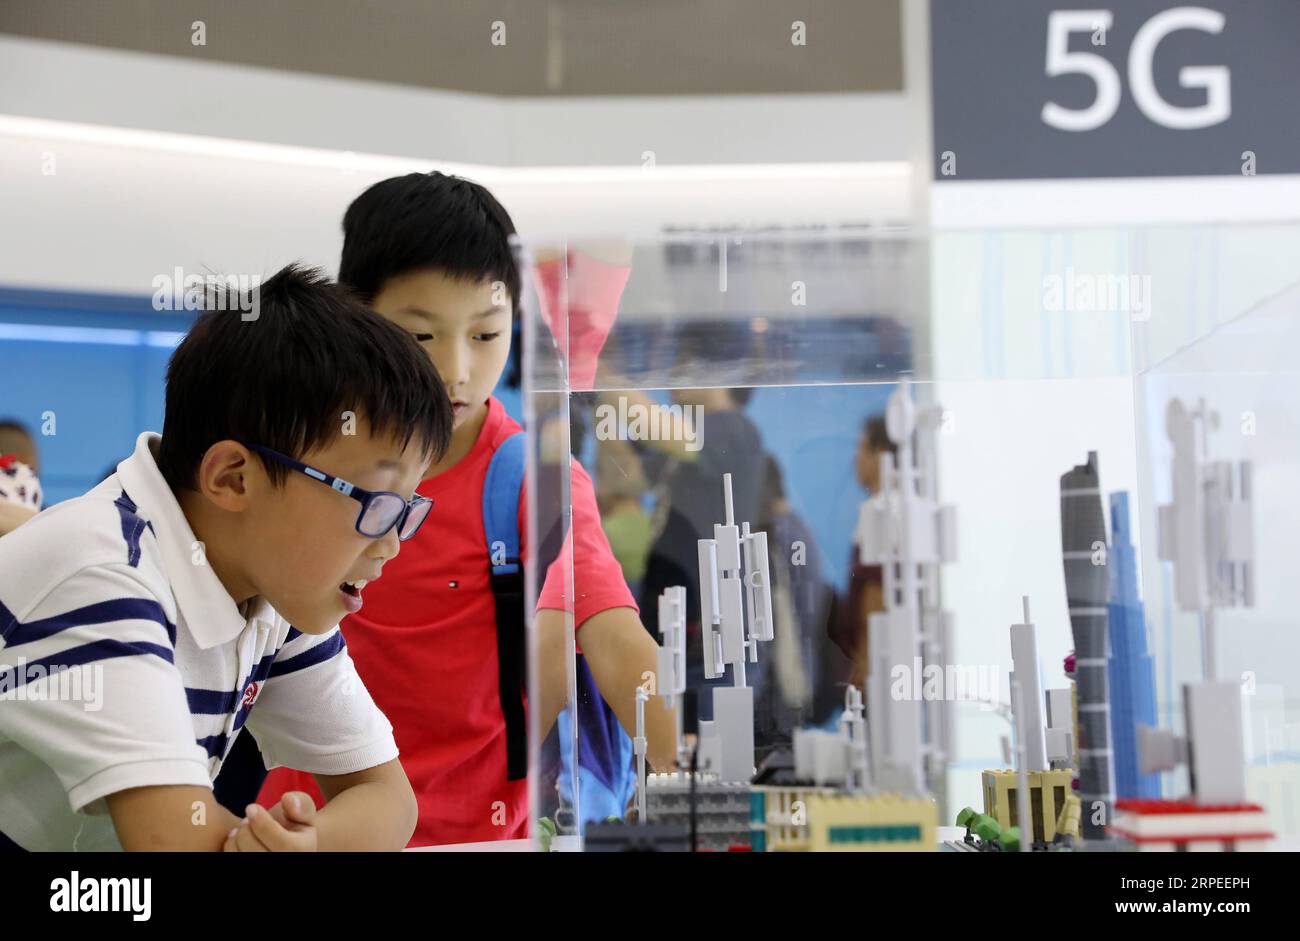 (190827) -- SHANGHAI, Aug. 27, 2019 -- Kids view a model of 5G base station at the Huawei 5G Experience Booth during the preview of the 2019 World Artificial Intelligence Conference in east China s Shanghai, Aug. 26, 2019. China s economic hub Shanghai will hold the 2019 World Artificial Intelligence Conference (WAIC) from August 29 to 31. This year s event will focus on a connected intelligent world enabled by the development of AI technologies, according to the Shanghai municipal government. There will be two summit forums, where governors, representatives from international organizations, l Stock Photo